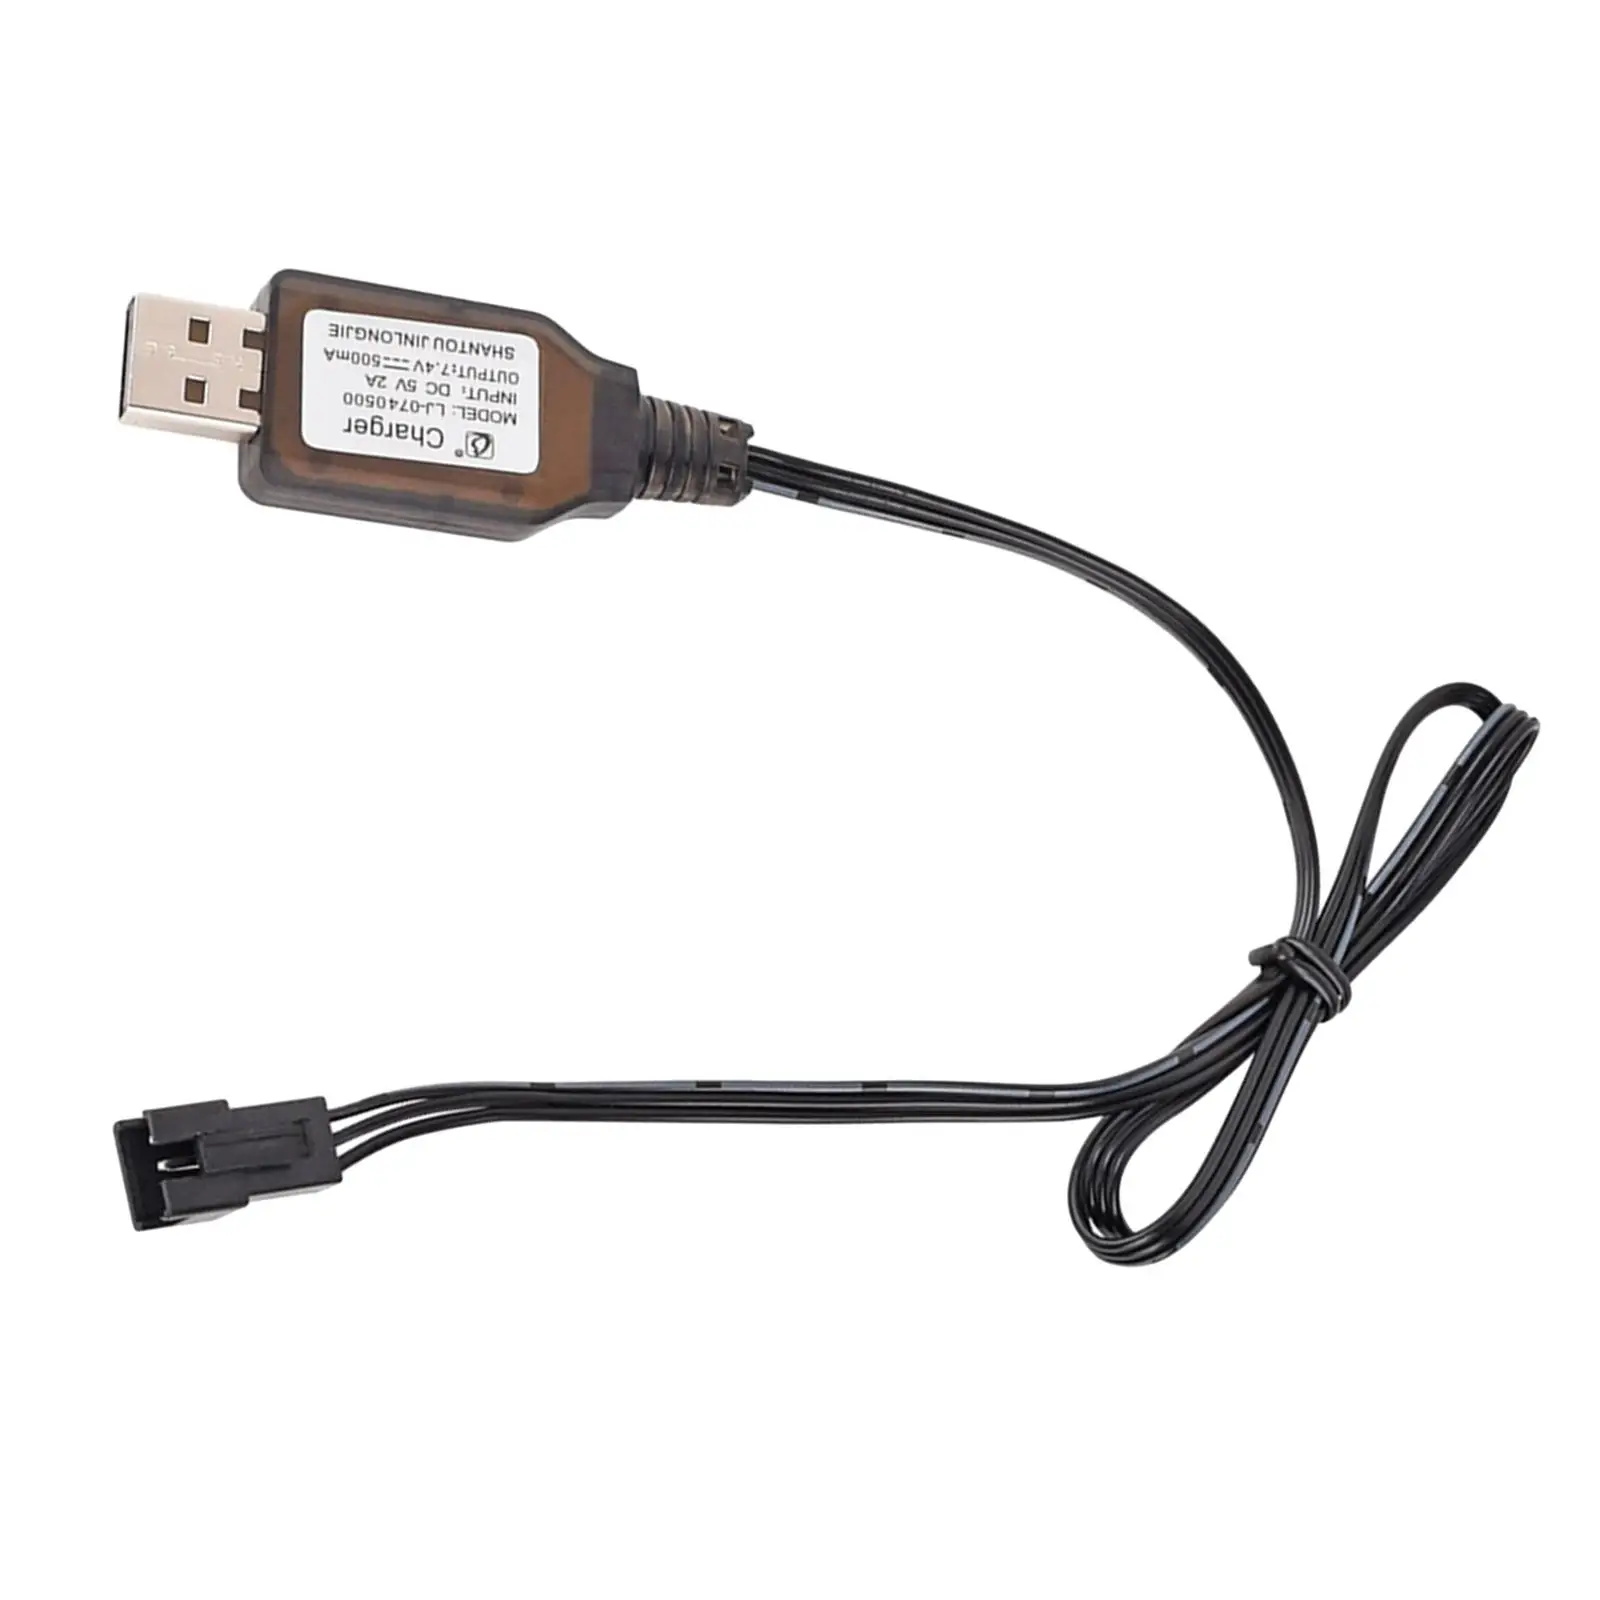 Battery USB Charger Cable 7.4V 3 Pin Smart 500MA with SM-3P Plug Connector for RC Car Helicopters Remote Control Toys Boat Plane